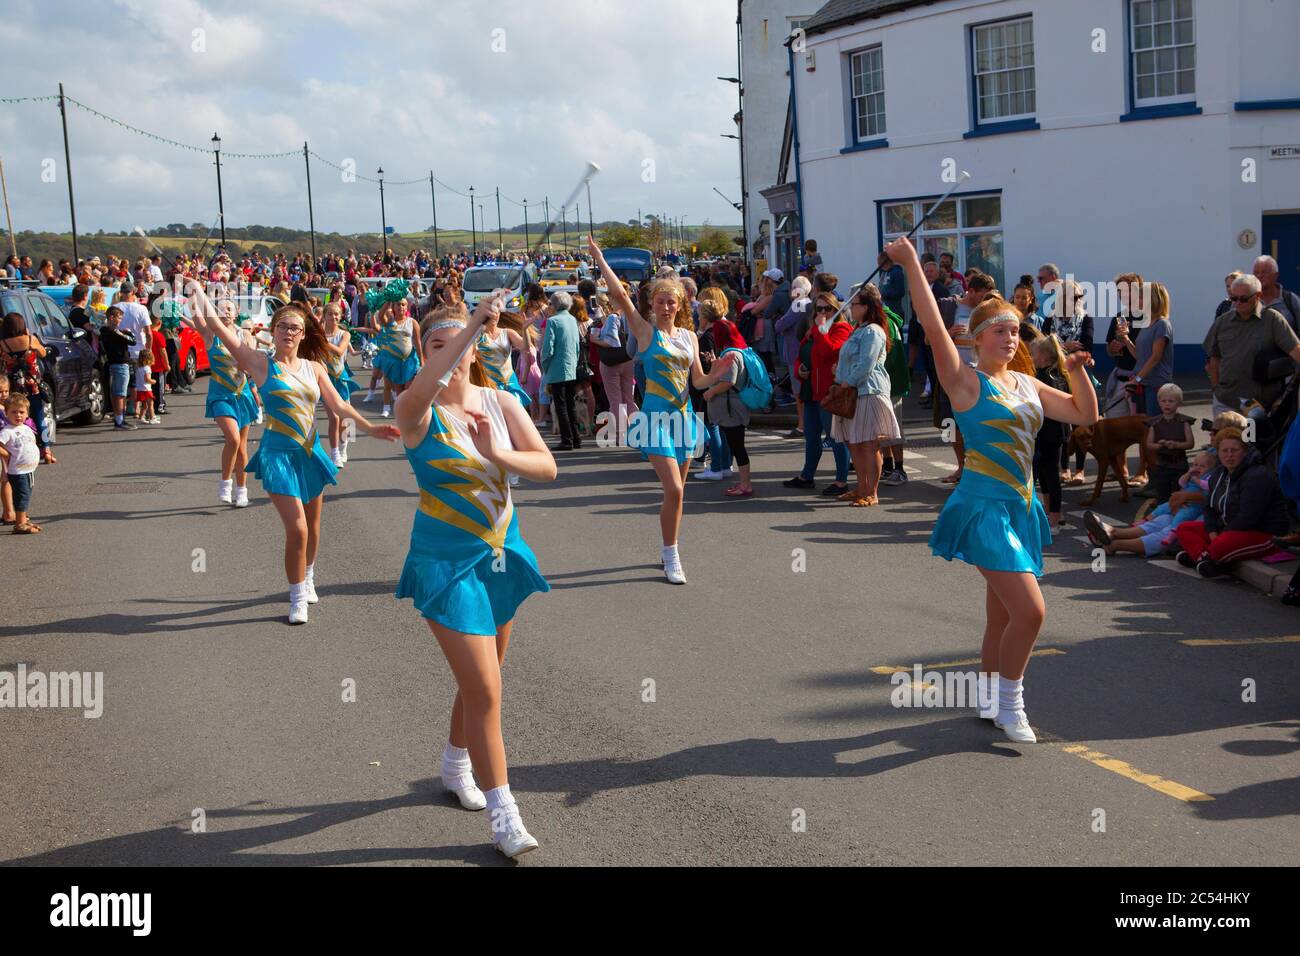 Baton twirling cheerleaders at the Appledore Carnival, August 2019 Stock Photo